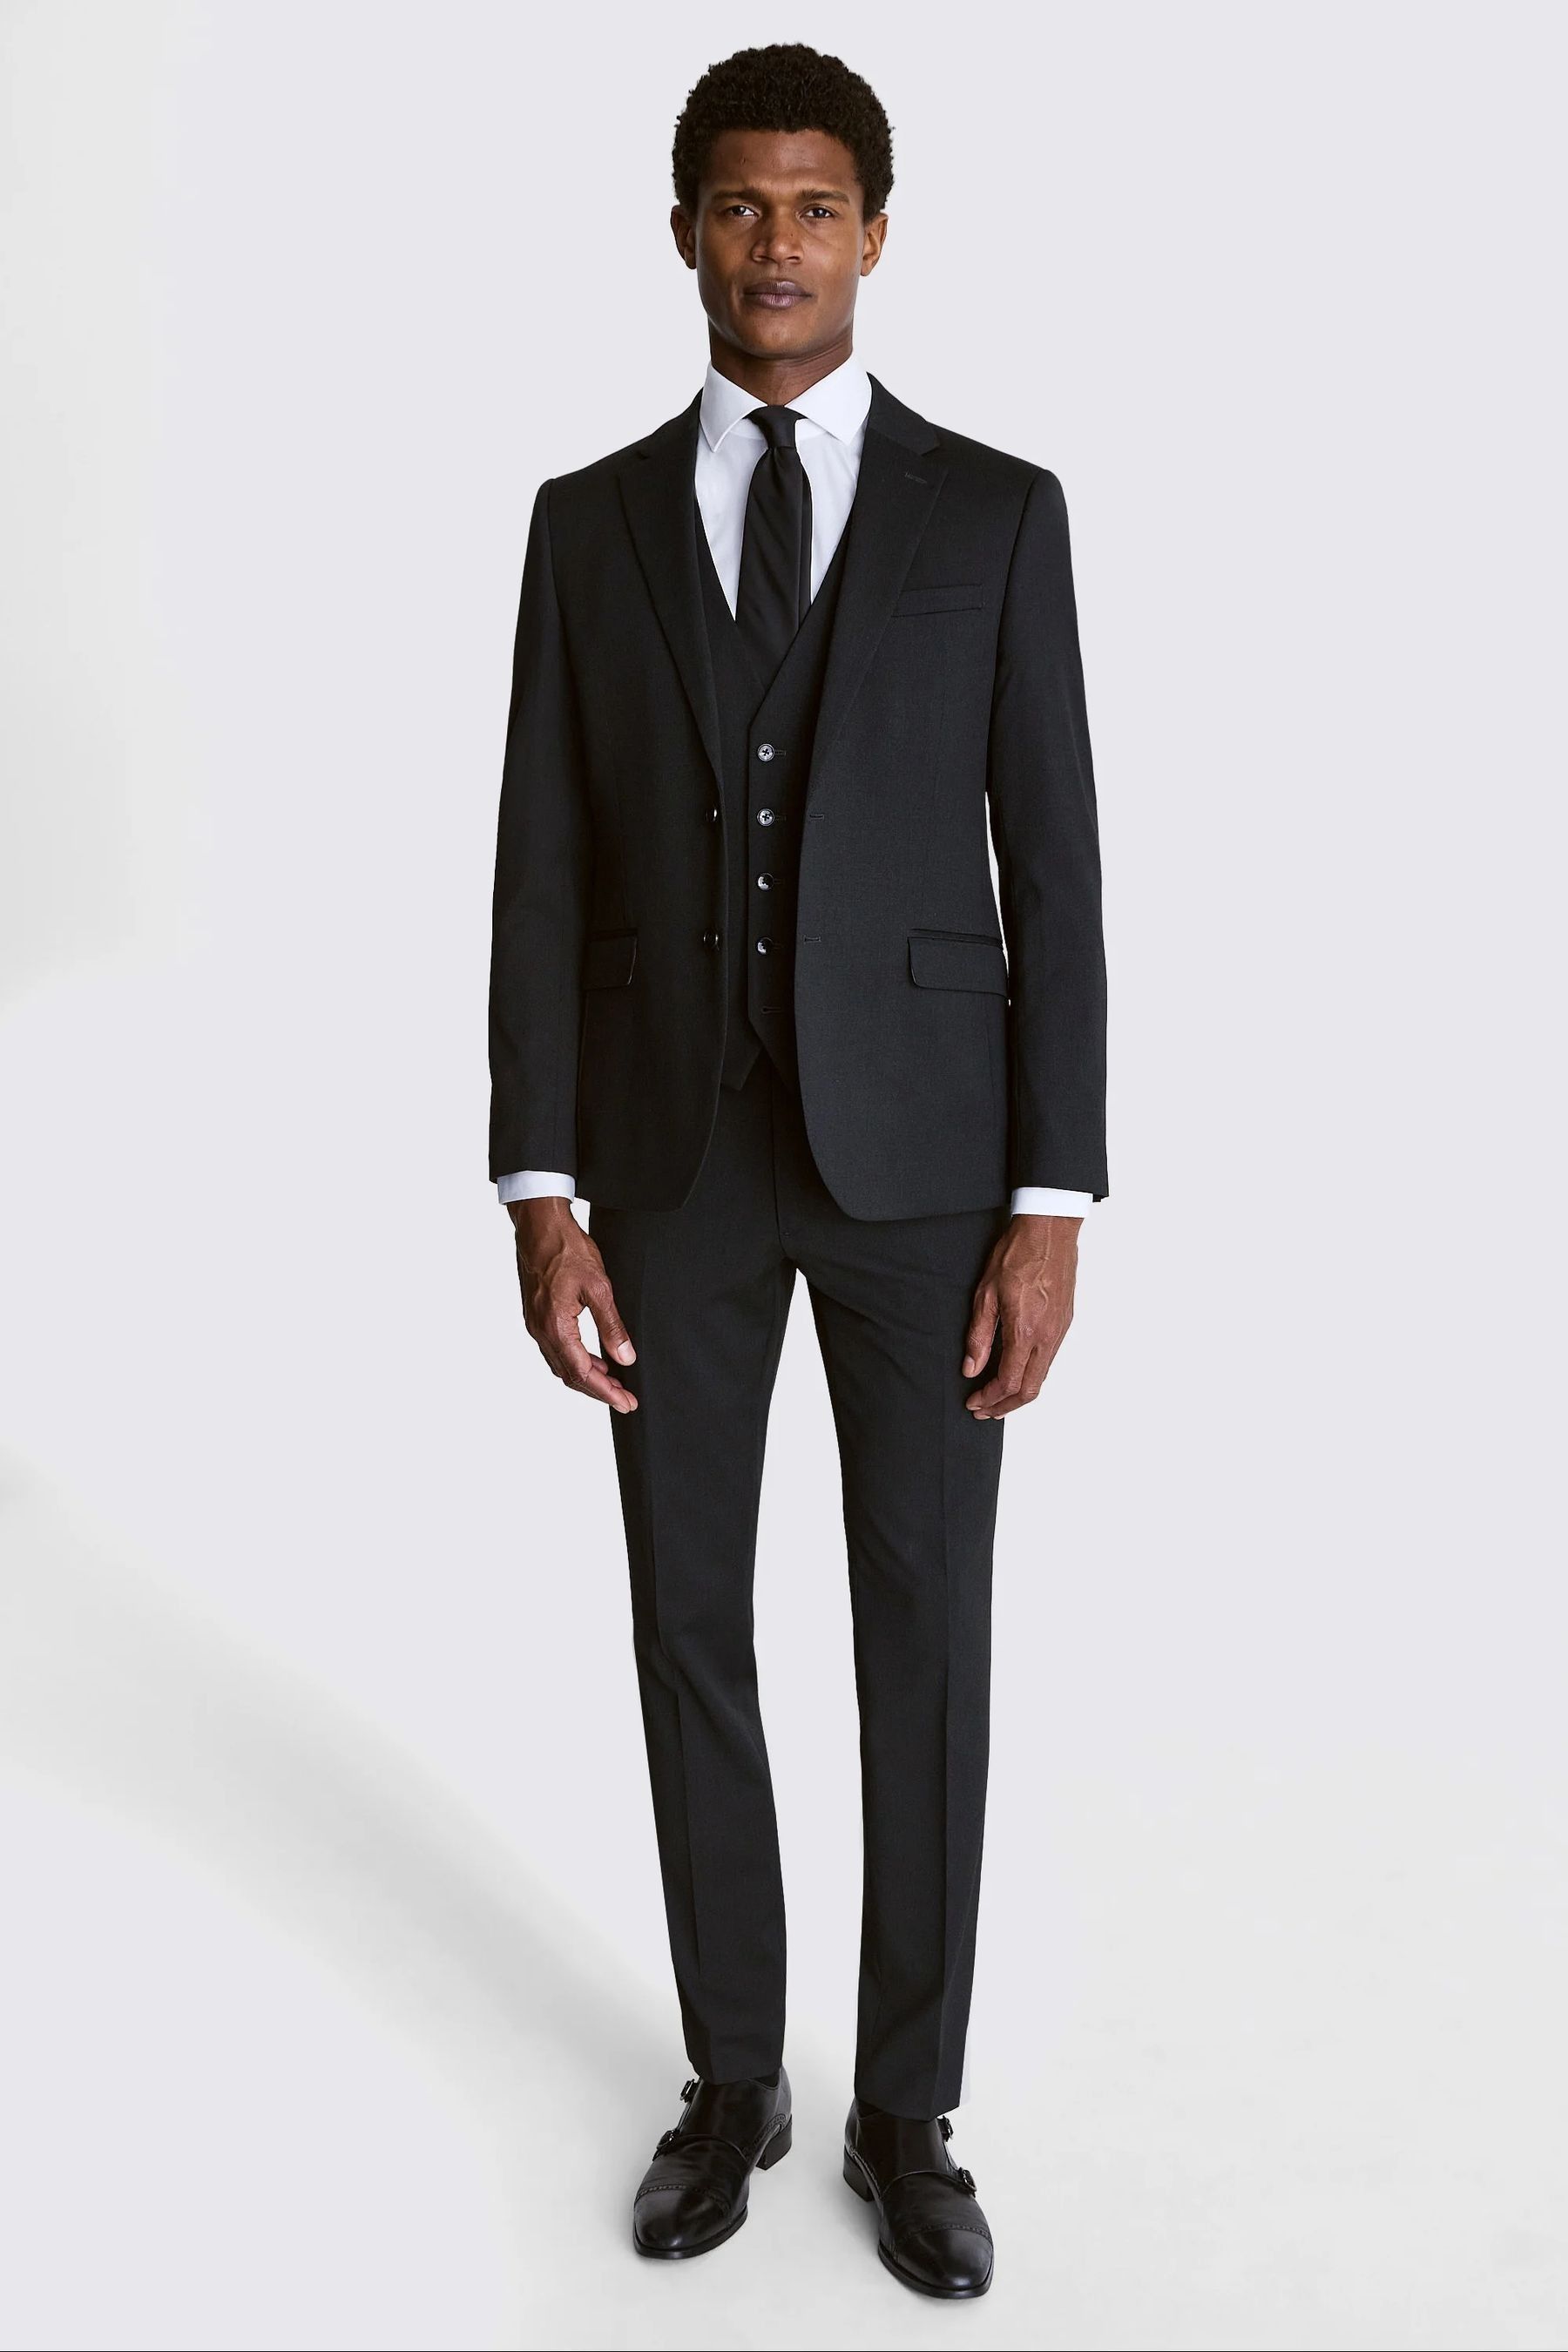 Buy MOSS Charcoal Grey Stretch Suit: Jacket from the Next UK online shop